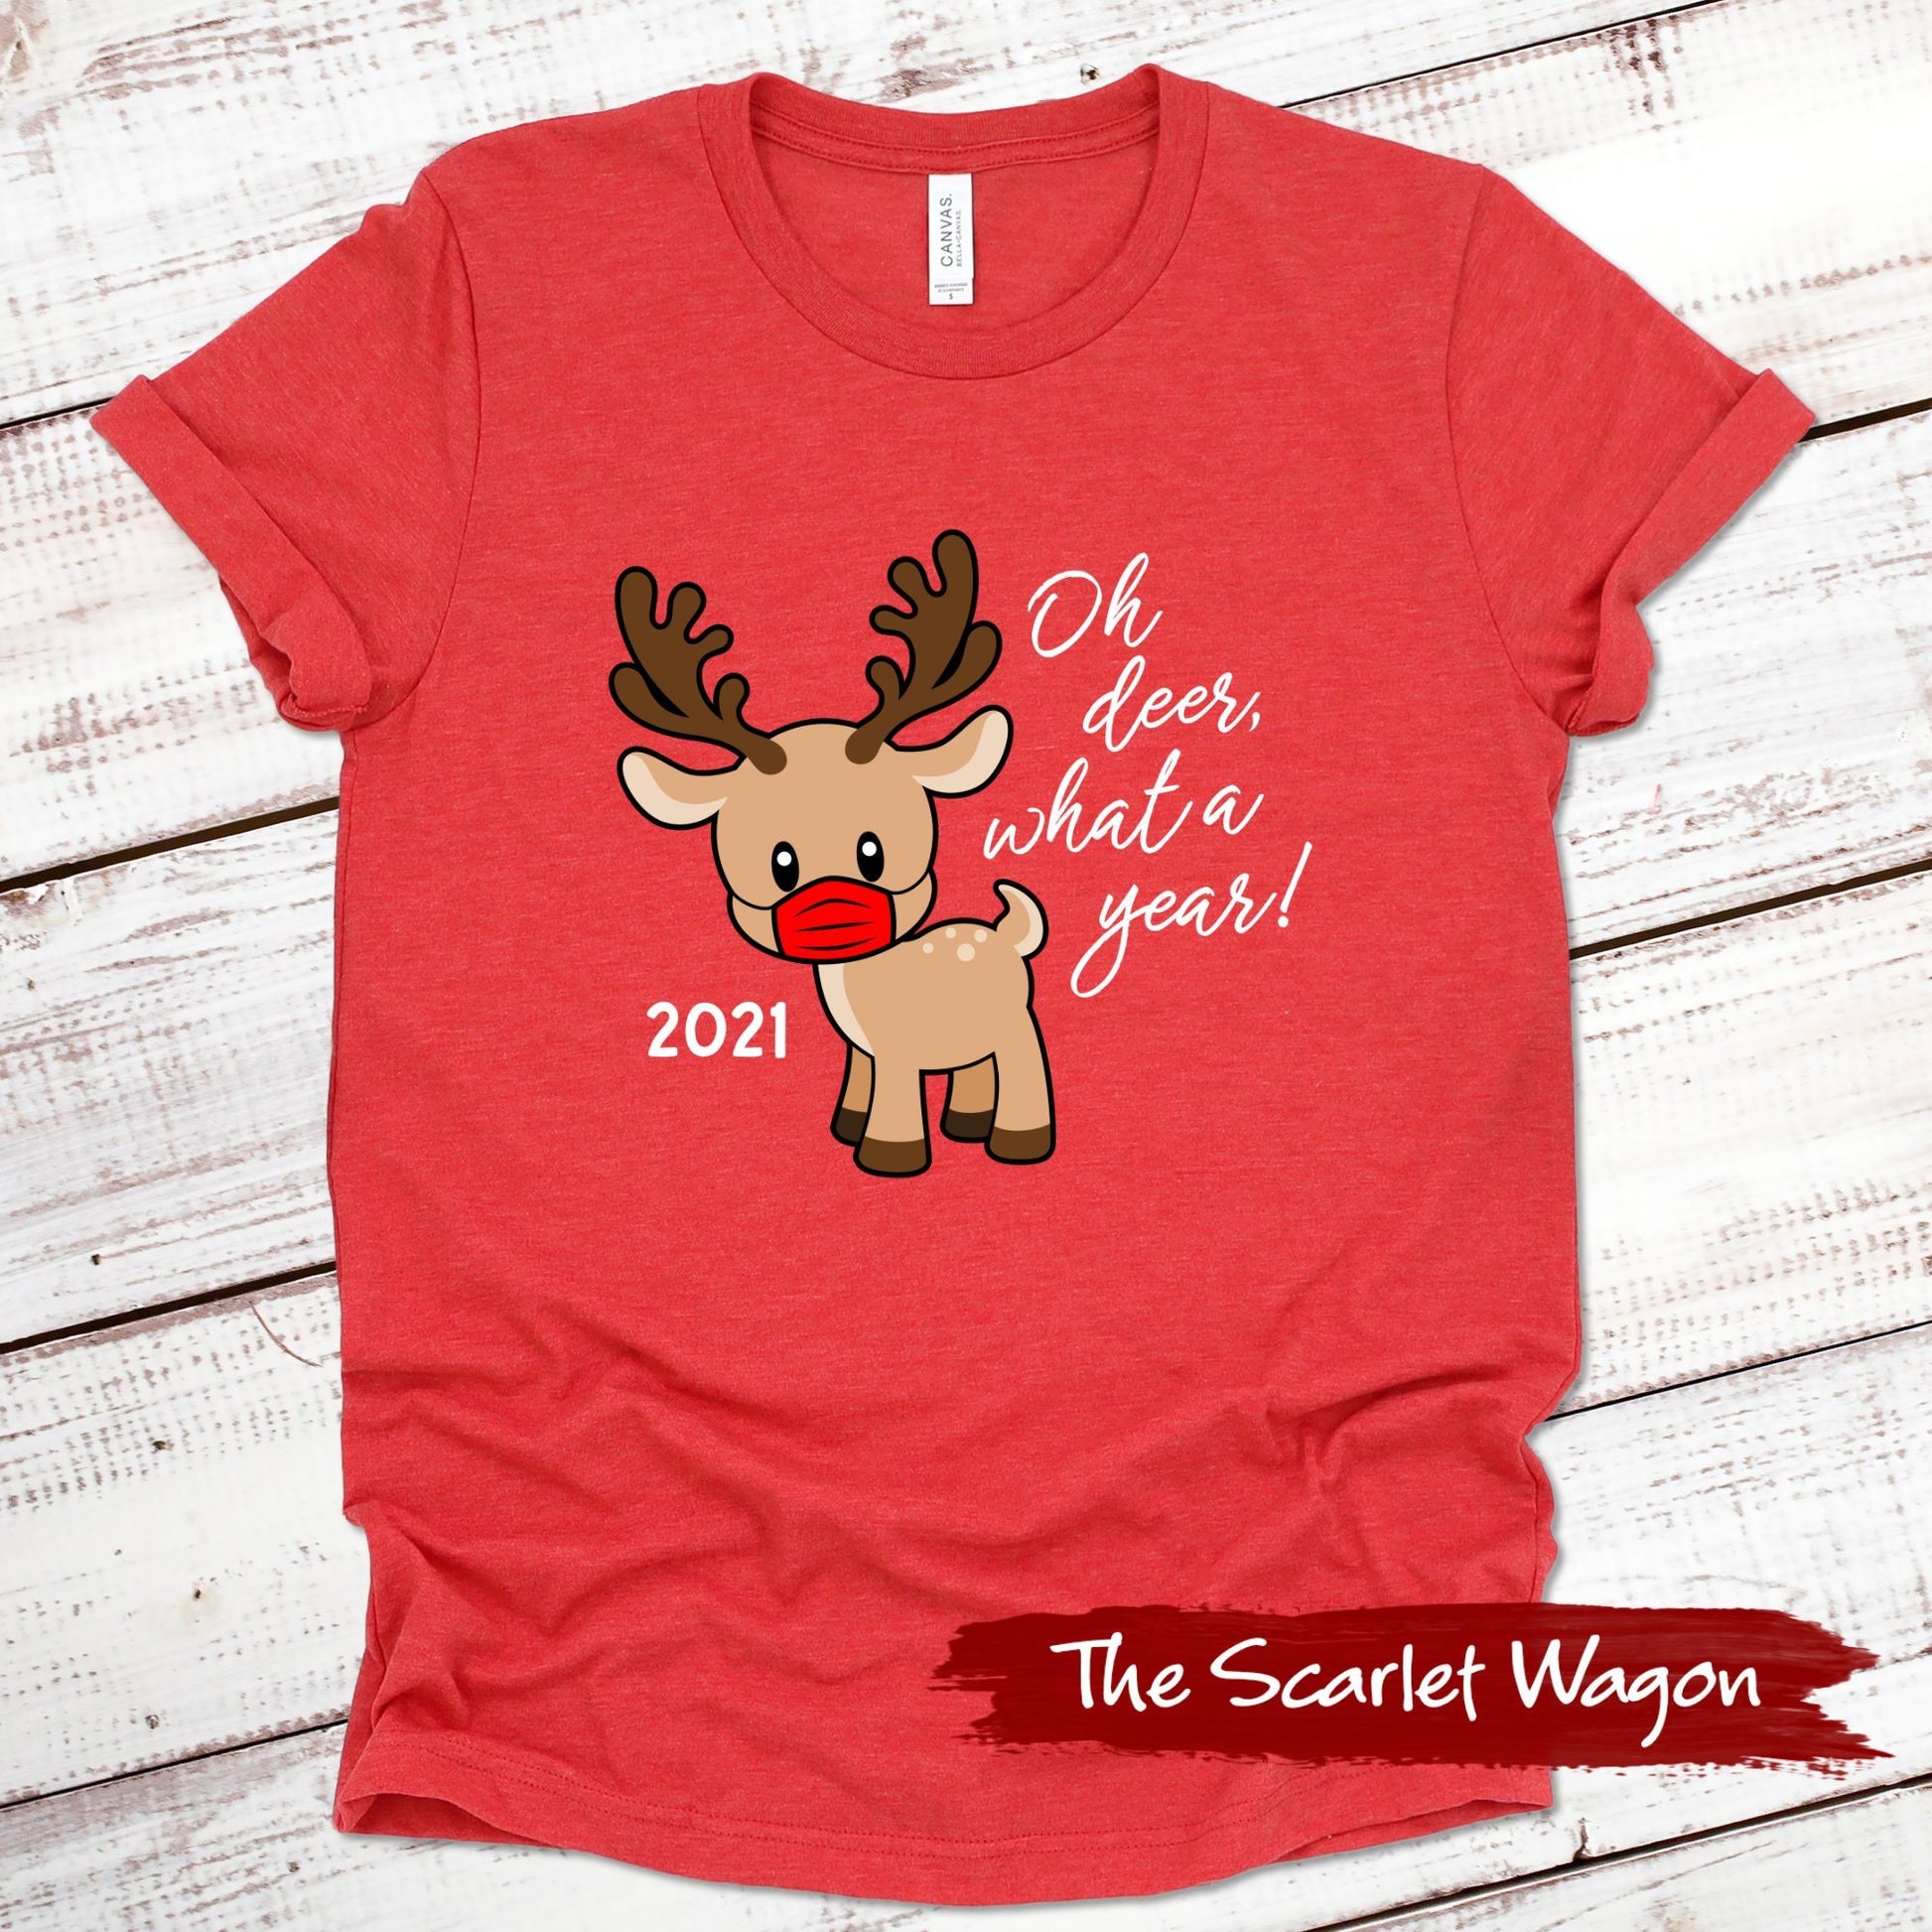 2021 Oh Deer What a Year Christmas Shirt Scarlet Wagon Heather Red XS 